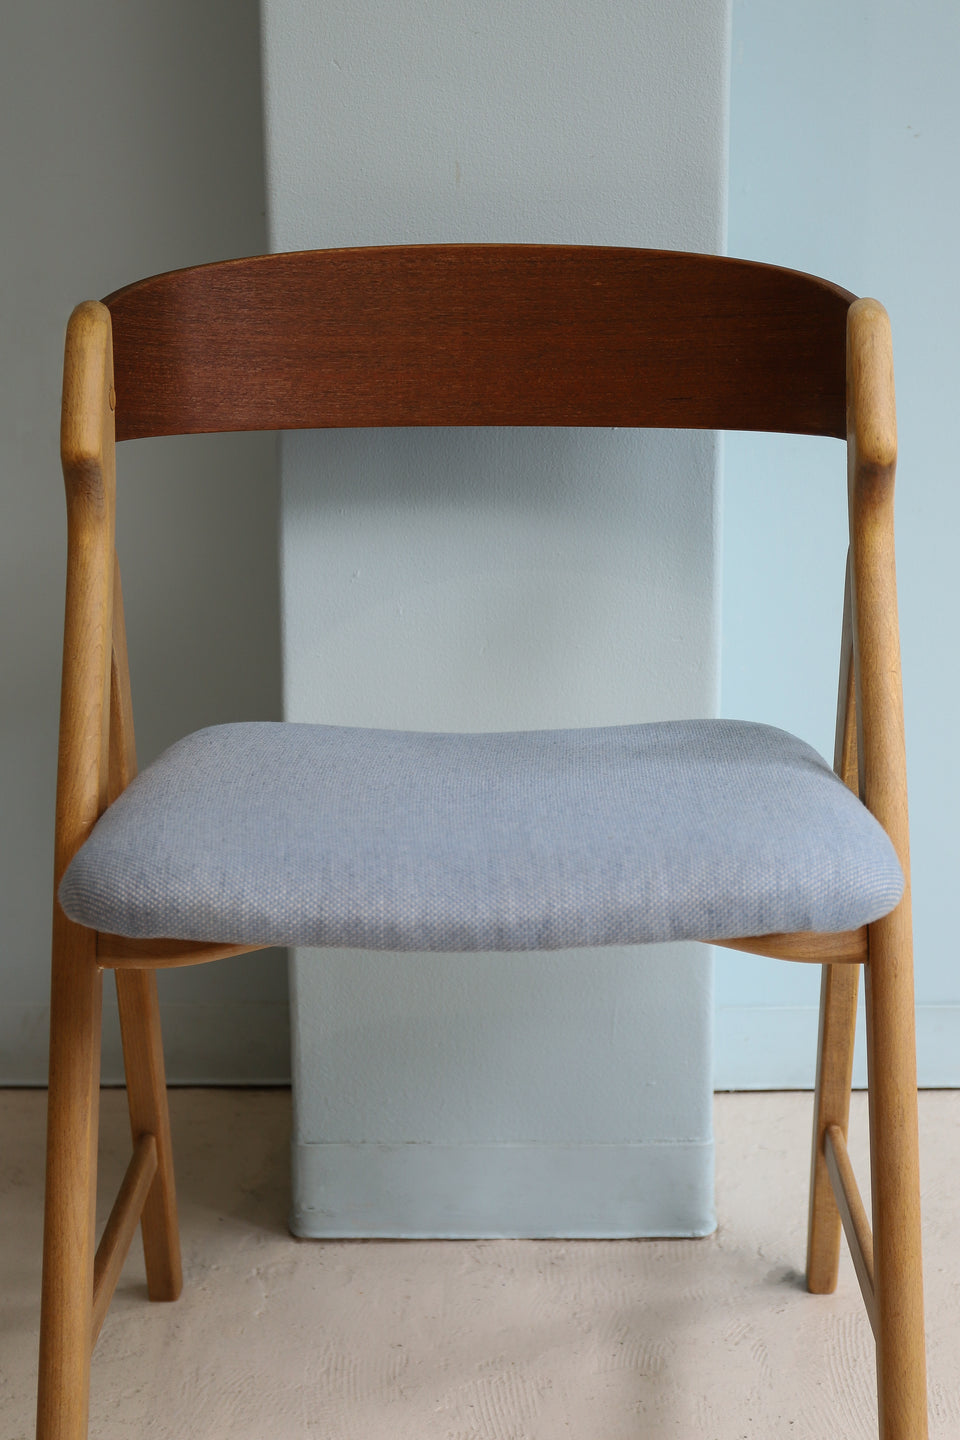 Danish Vintage Boltinge Stolefabrik Dining Chair no.71/デンマークヴィンテージ ダイニングチェア 椅子 北欧家具